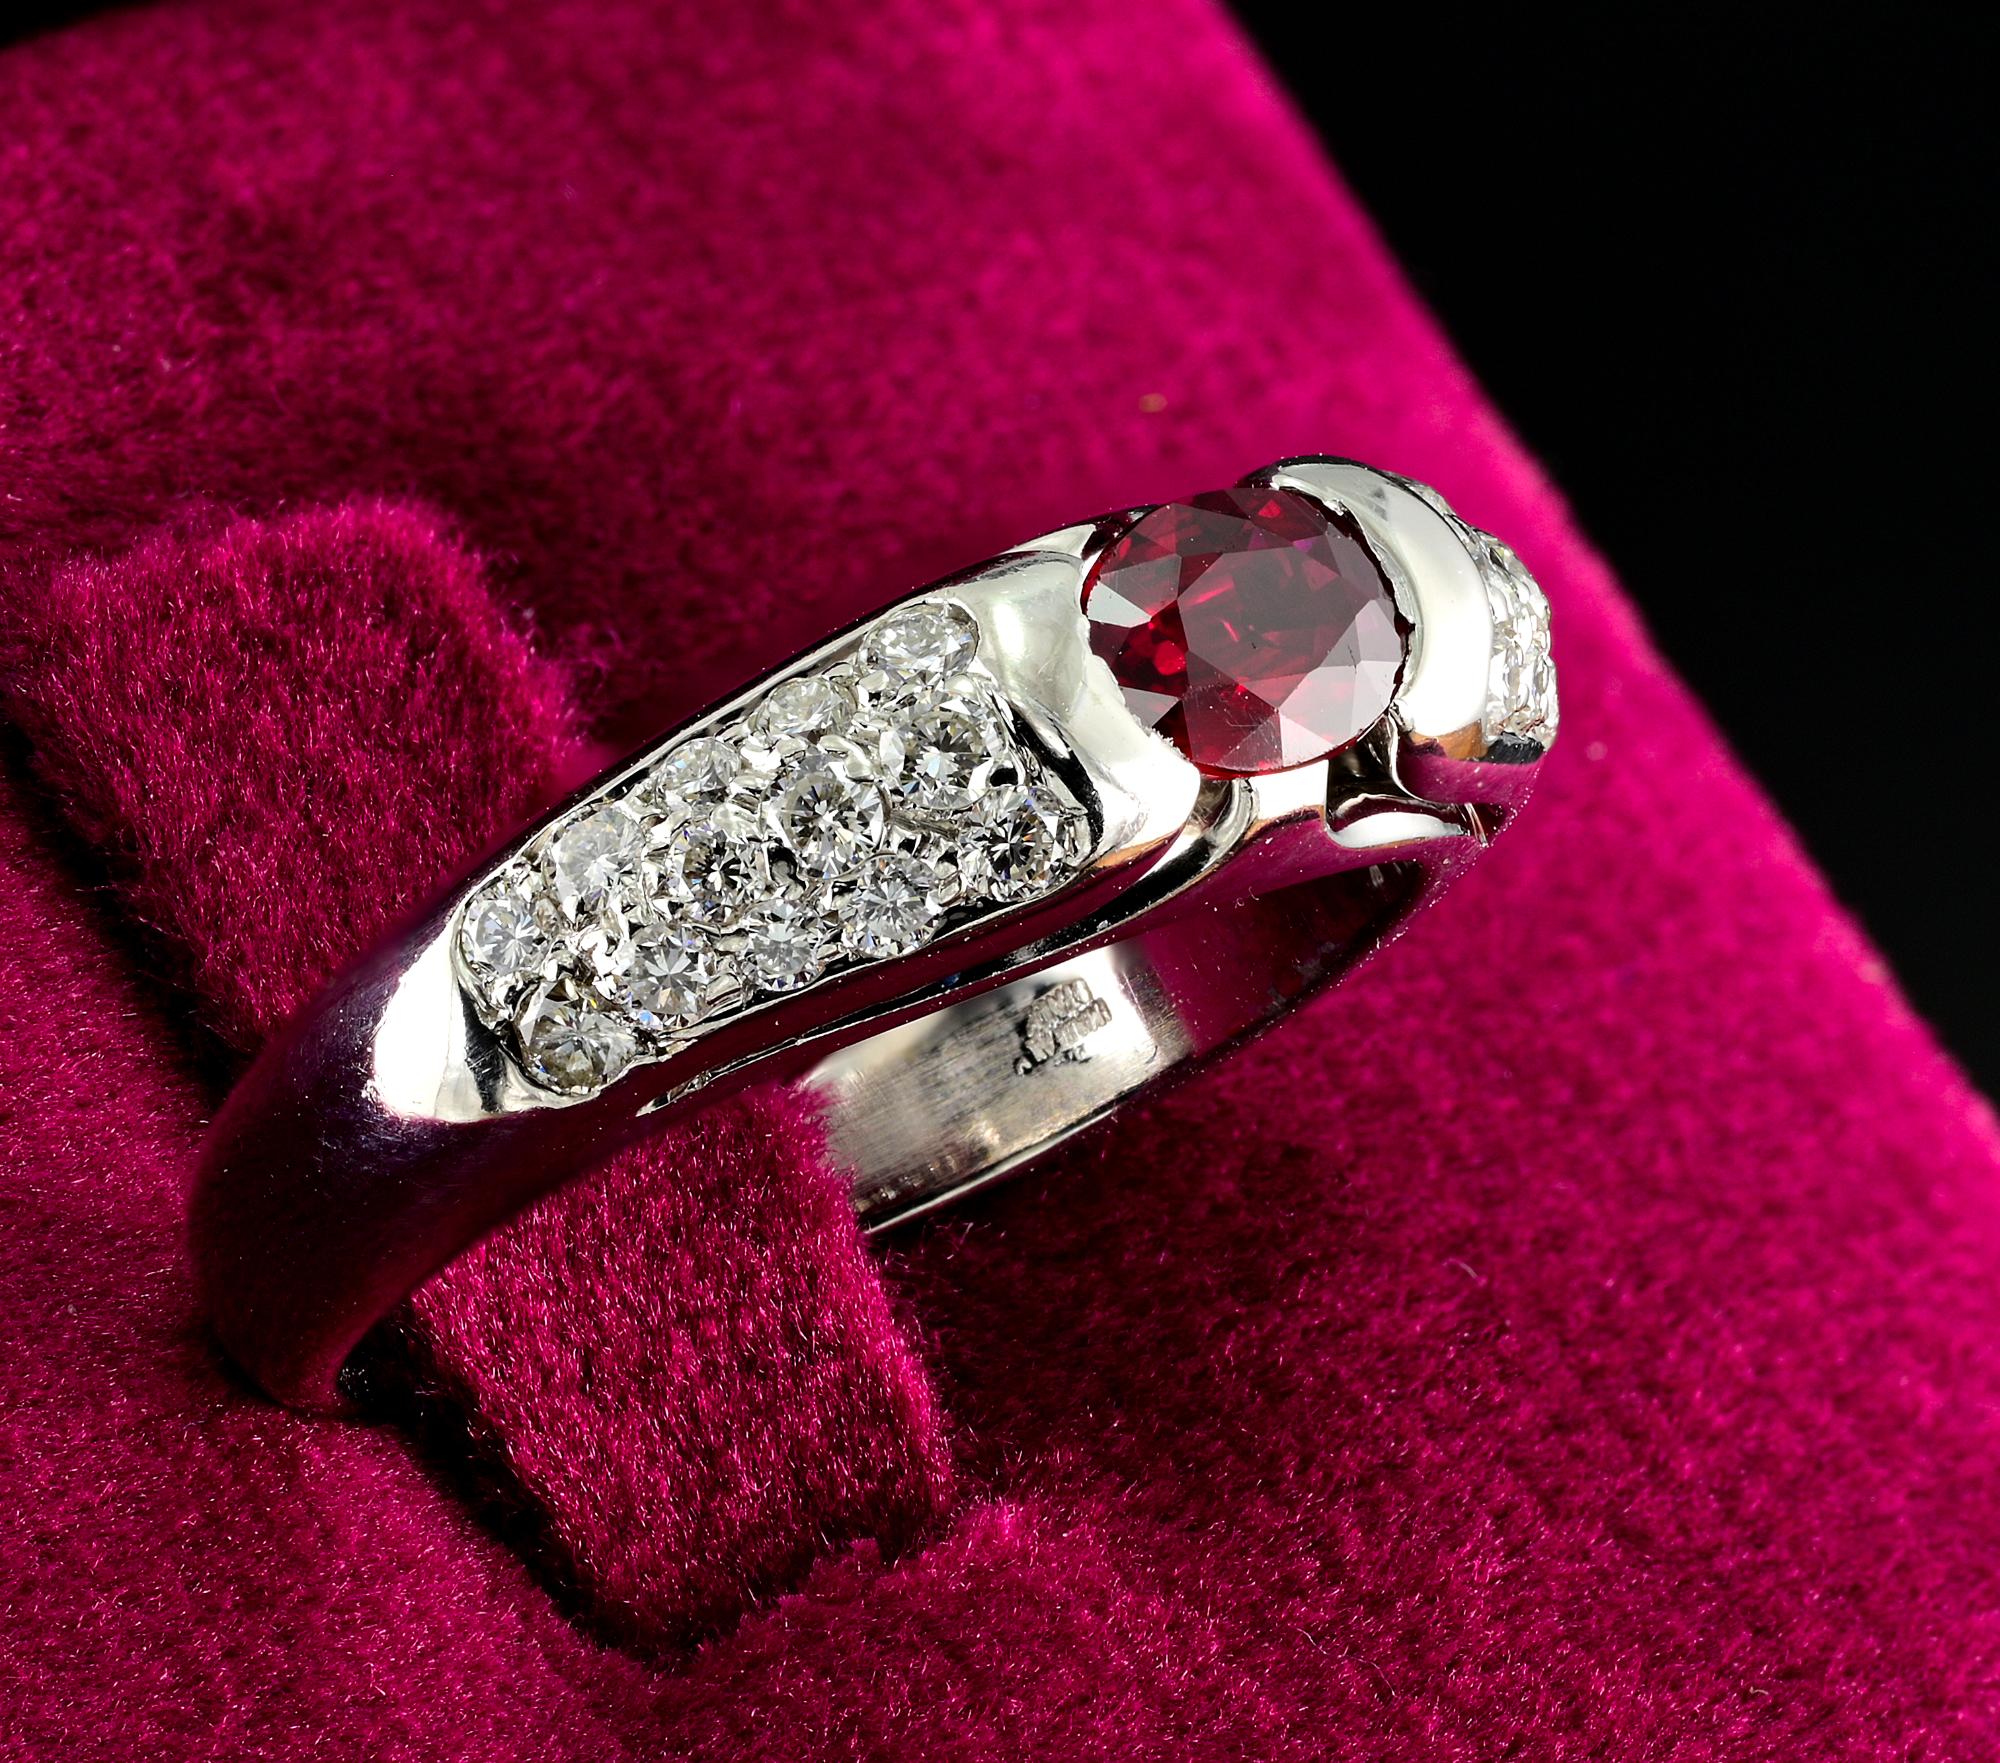 Oval Cut Iconic Bvlgari Ruby Diamond 18KT Ring 1980 For Sale